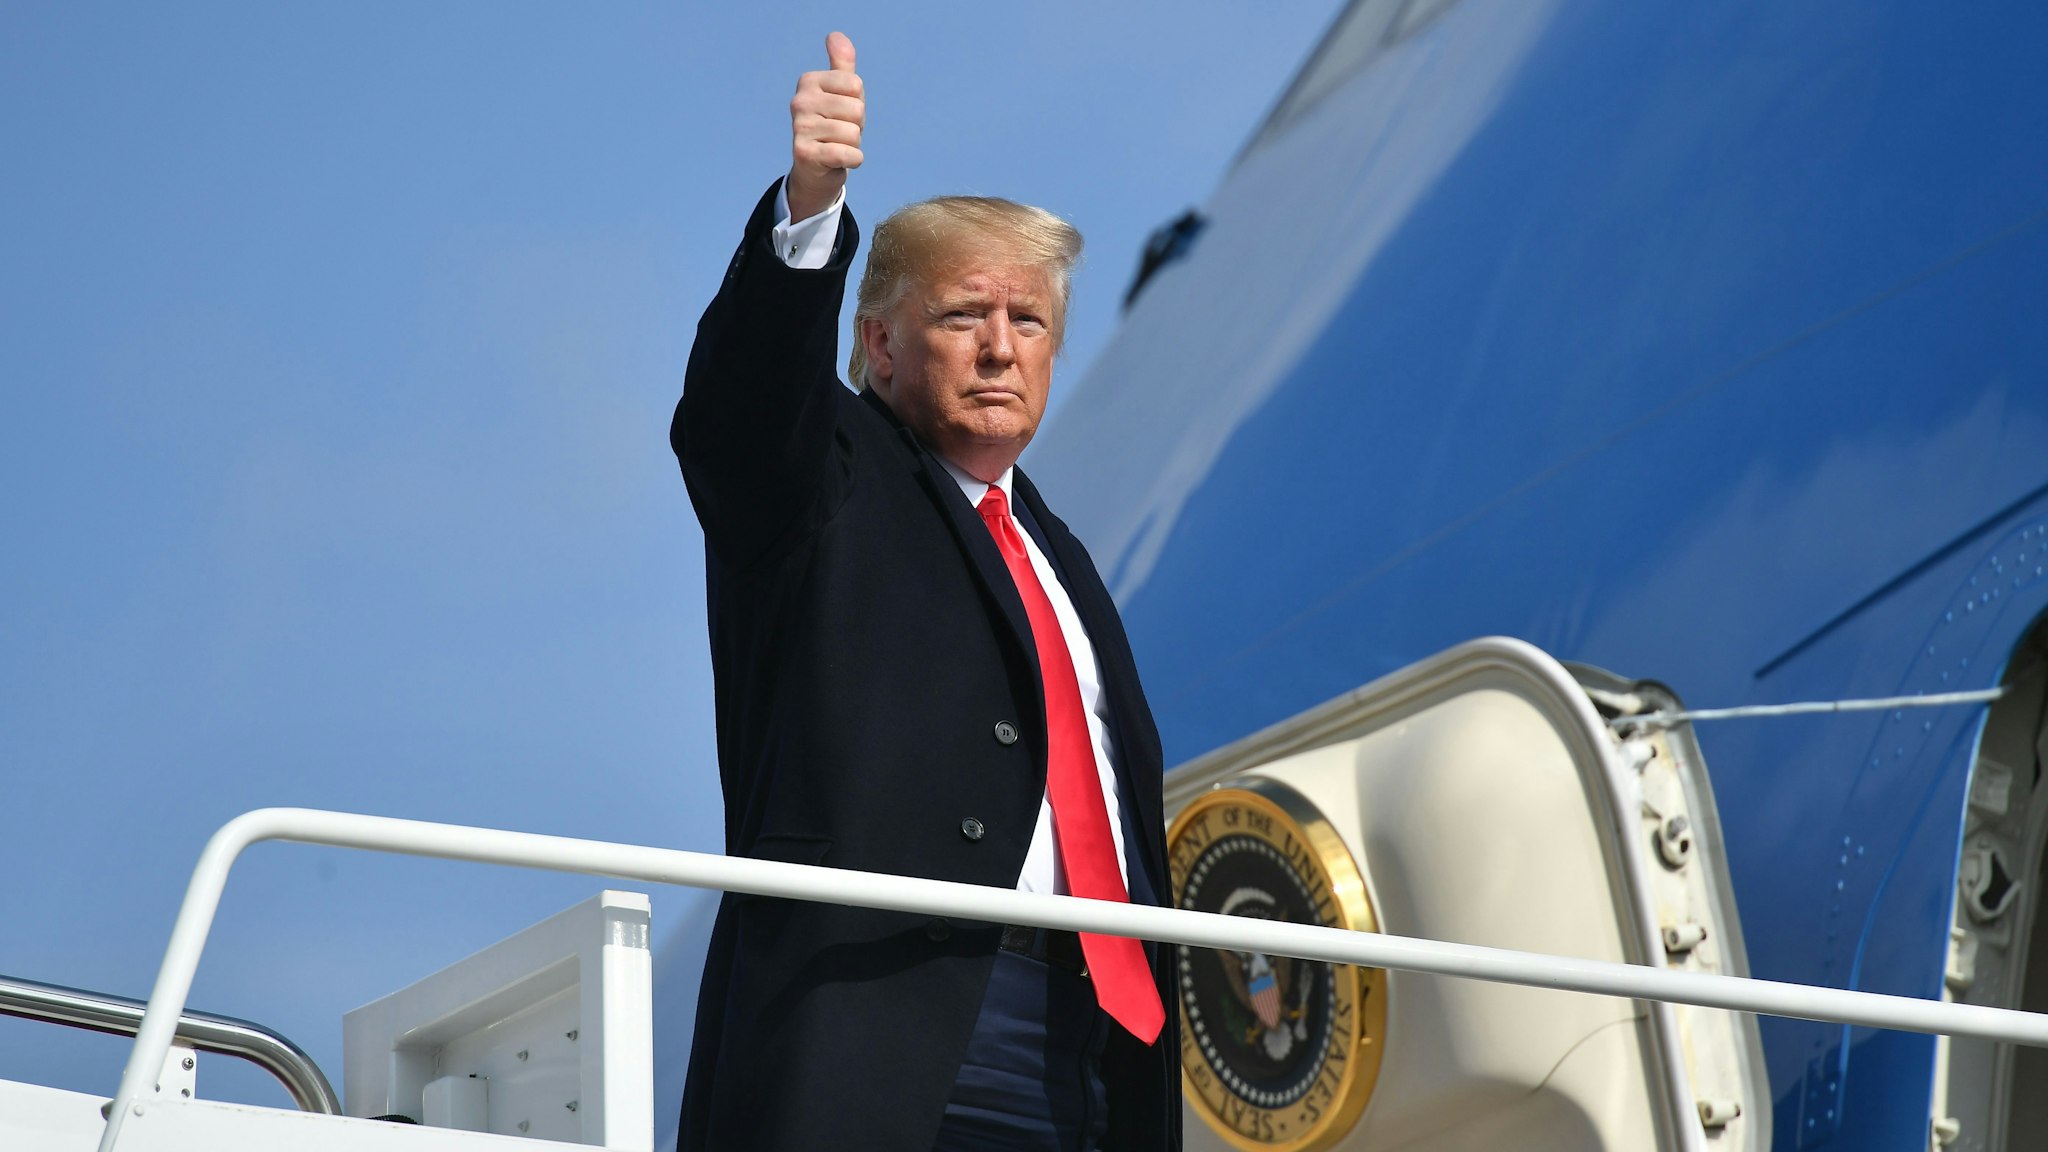 US President Donald Trump makes his way to board Air Force One before departing from Andrews Air Force Base in Maryland on November 20, 2019. - President Trump is heading to Austin to tour an Apple computer manufacturing facility.